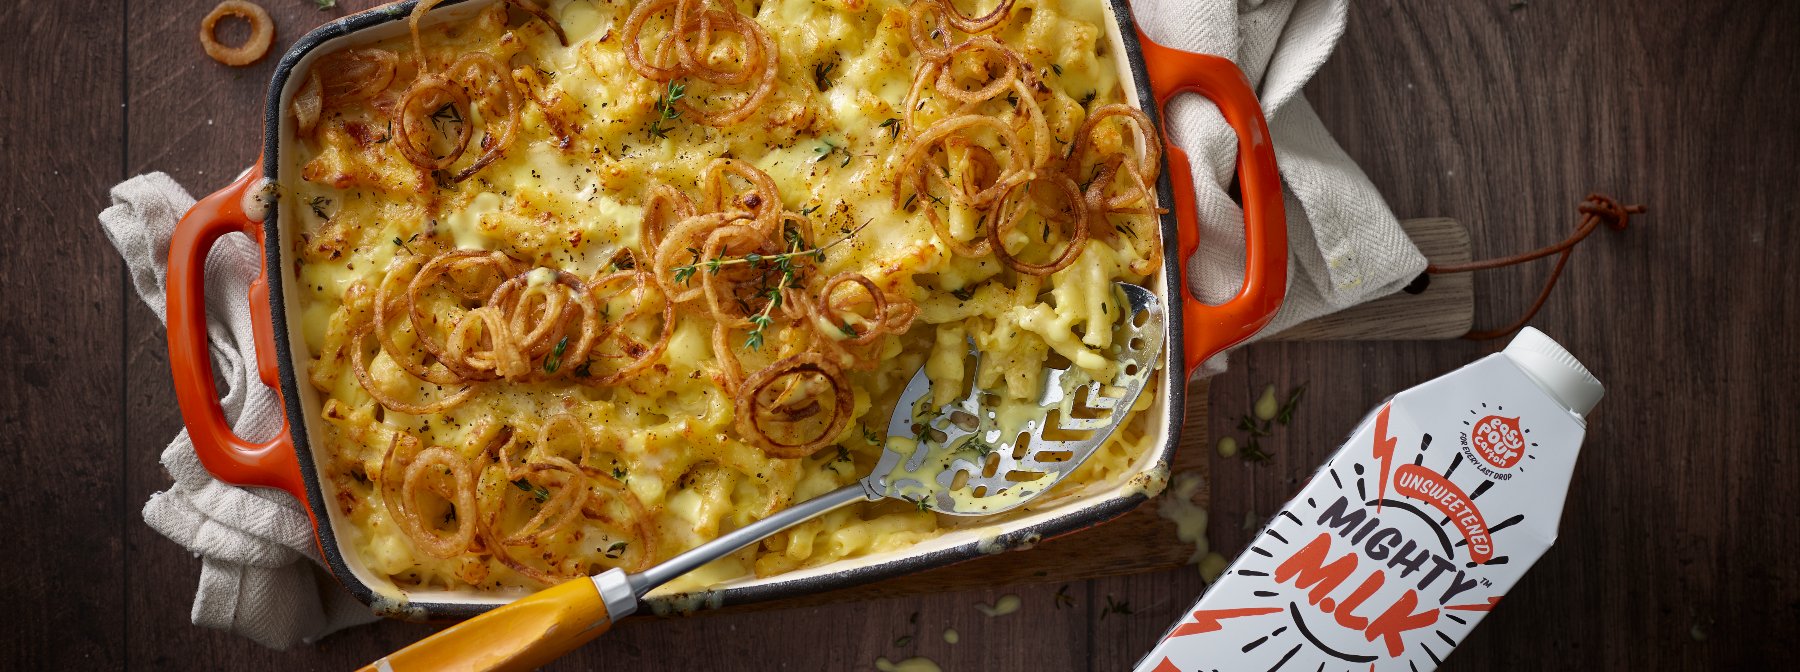 Mac and Cheese with Thin and Crispy Onions